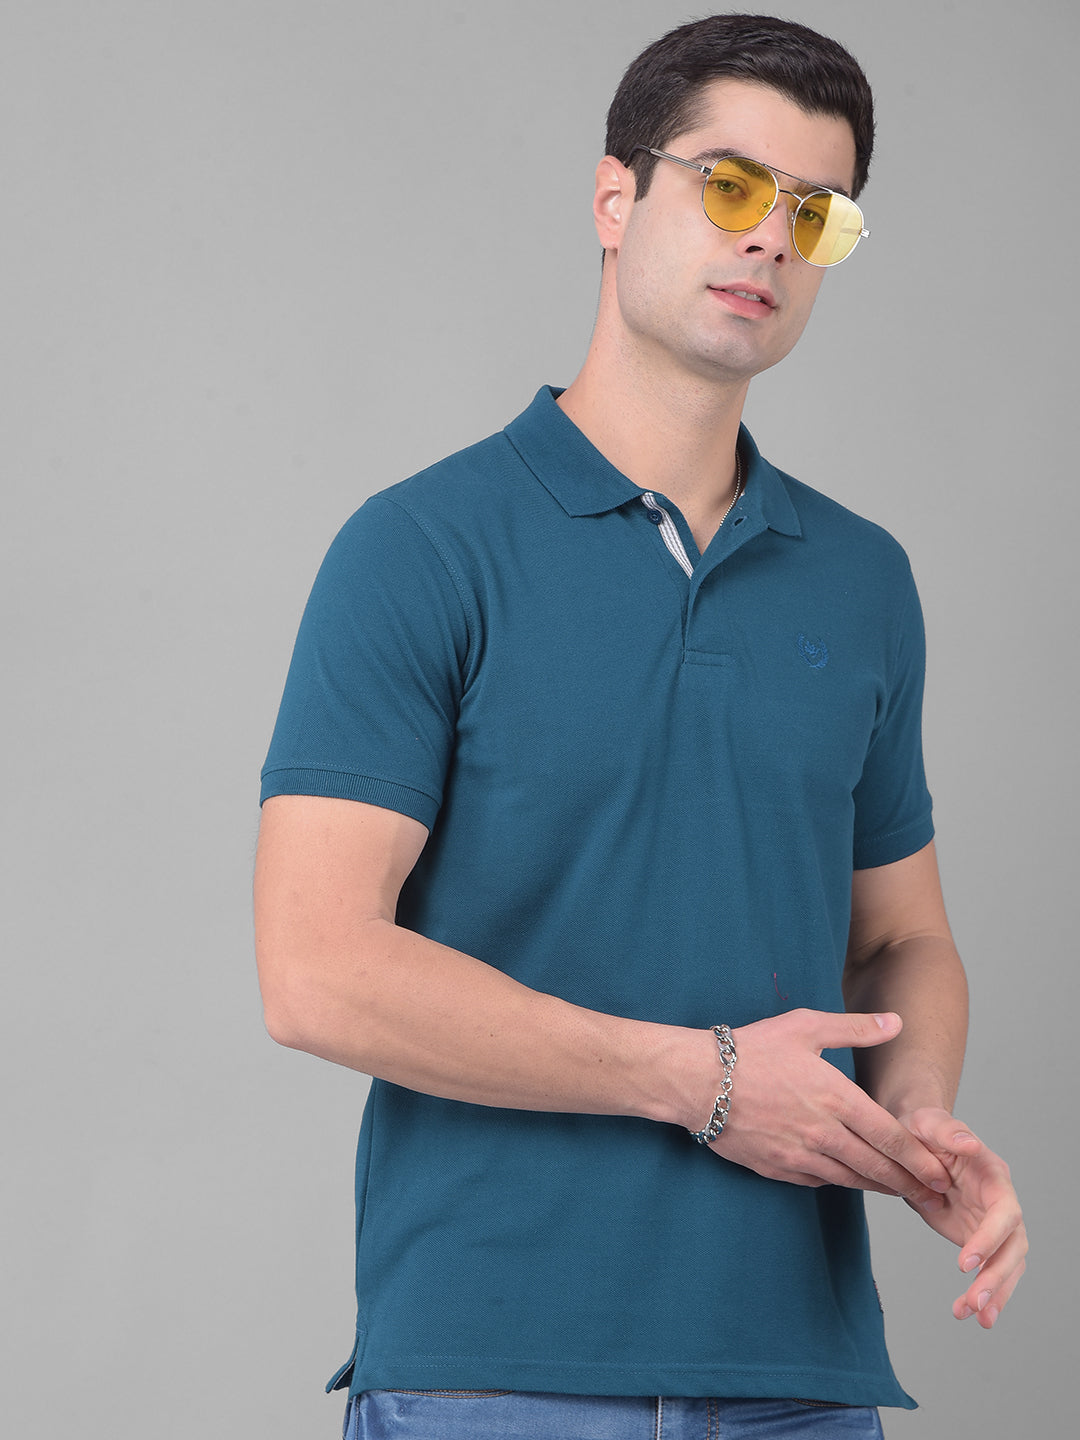 COBB SOLID CRYSTAL TEAL POLO NECK T-SHIRT